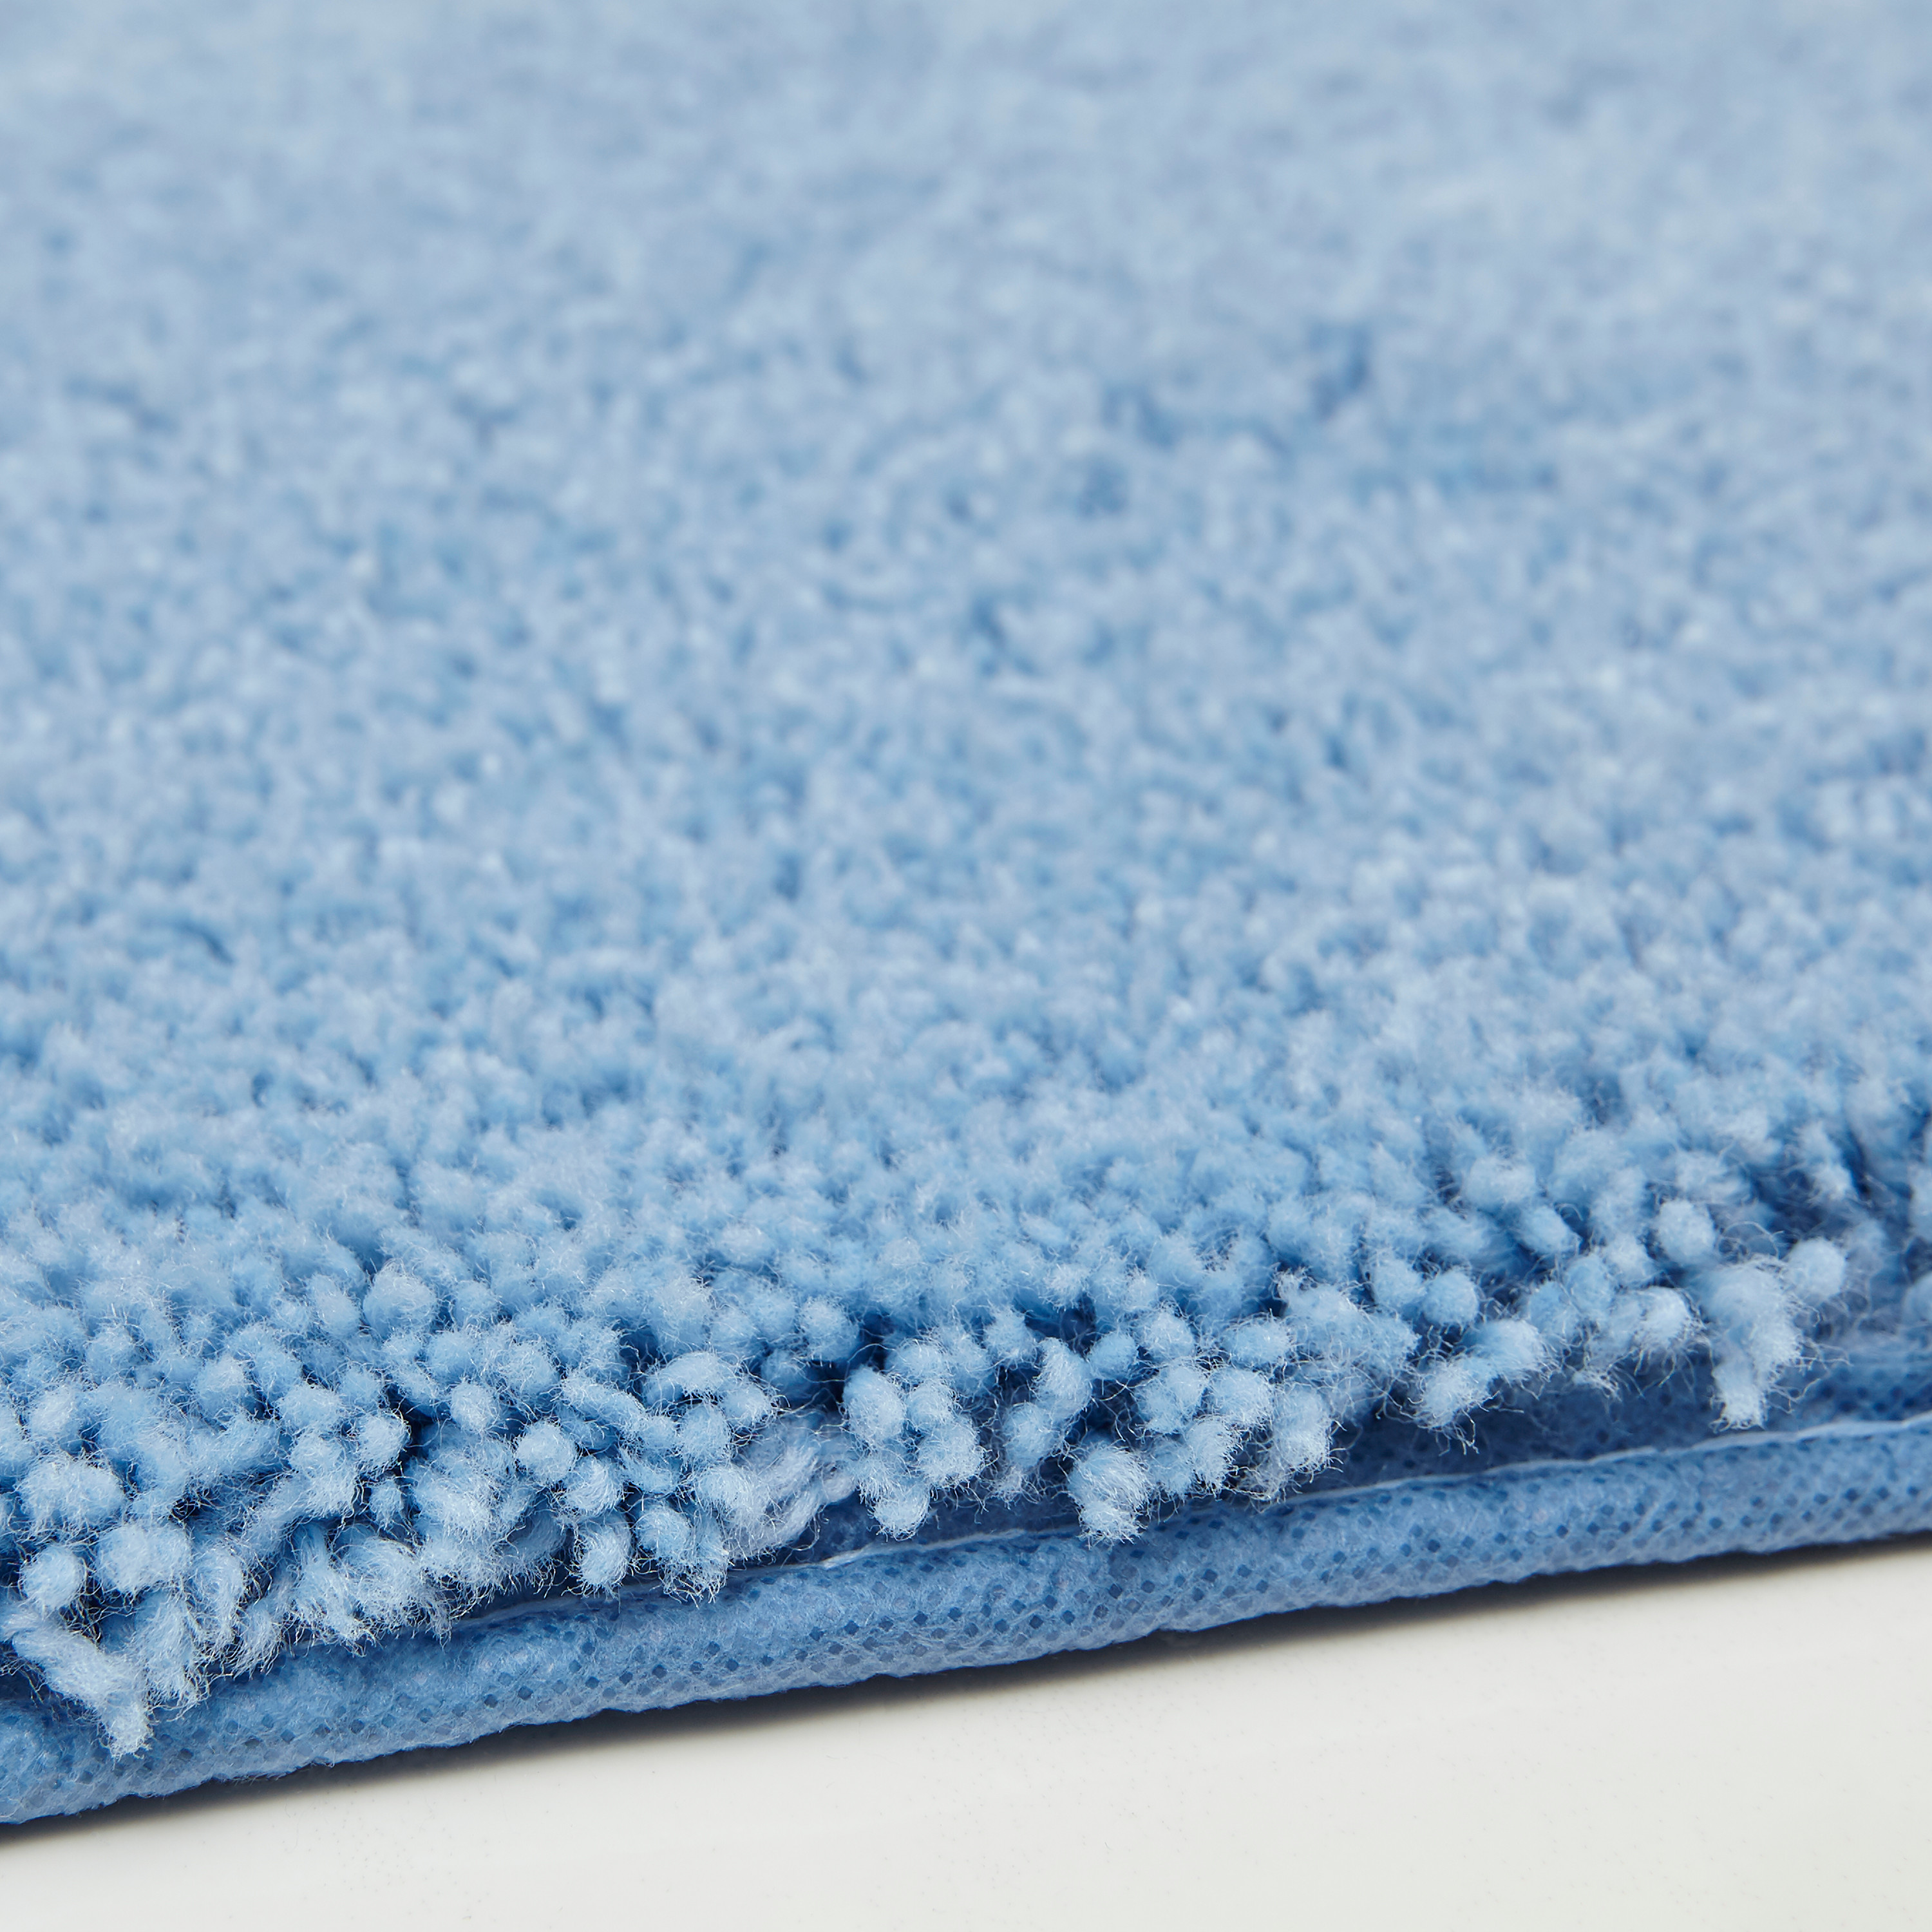 Mohawk Home Pure Perfection Nylon Bath Rug Scatter, Light Blue 1'5" x 2' - image 2 of 4